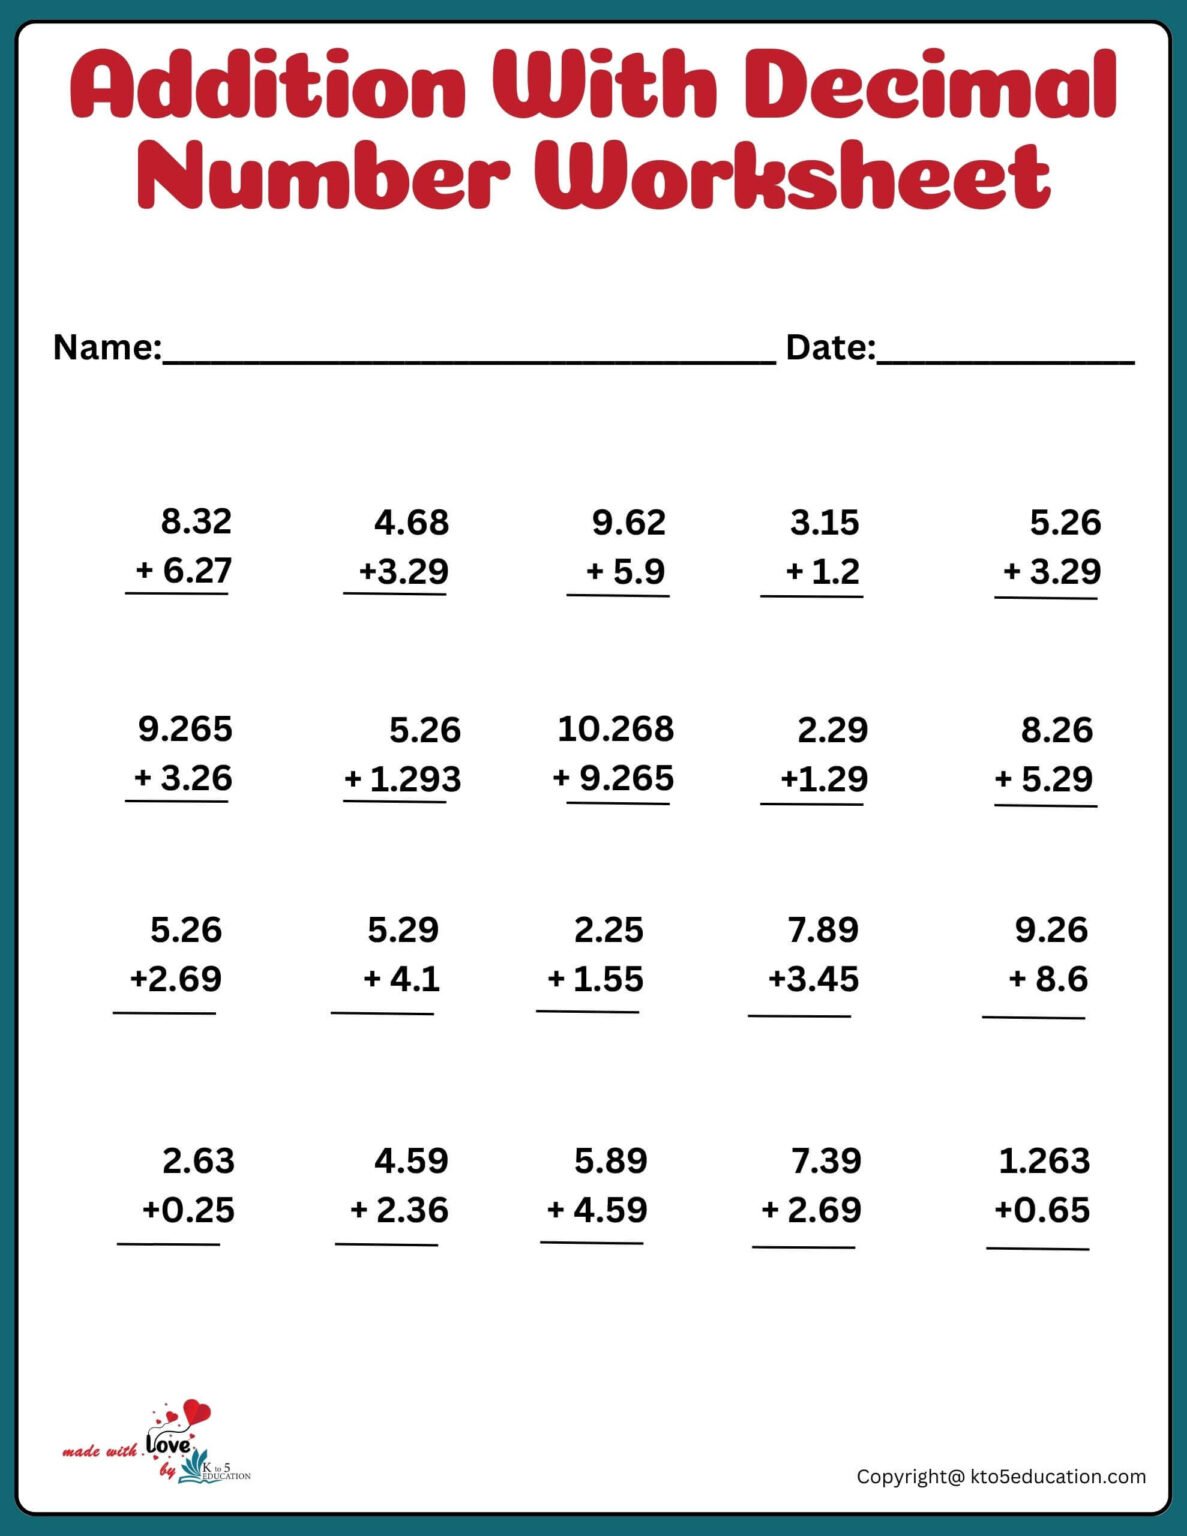 addition-with-decimal-worksheets-free-download